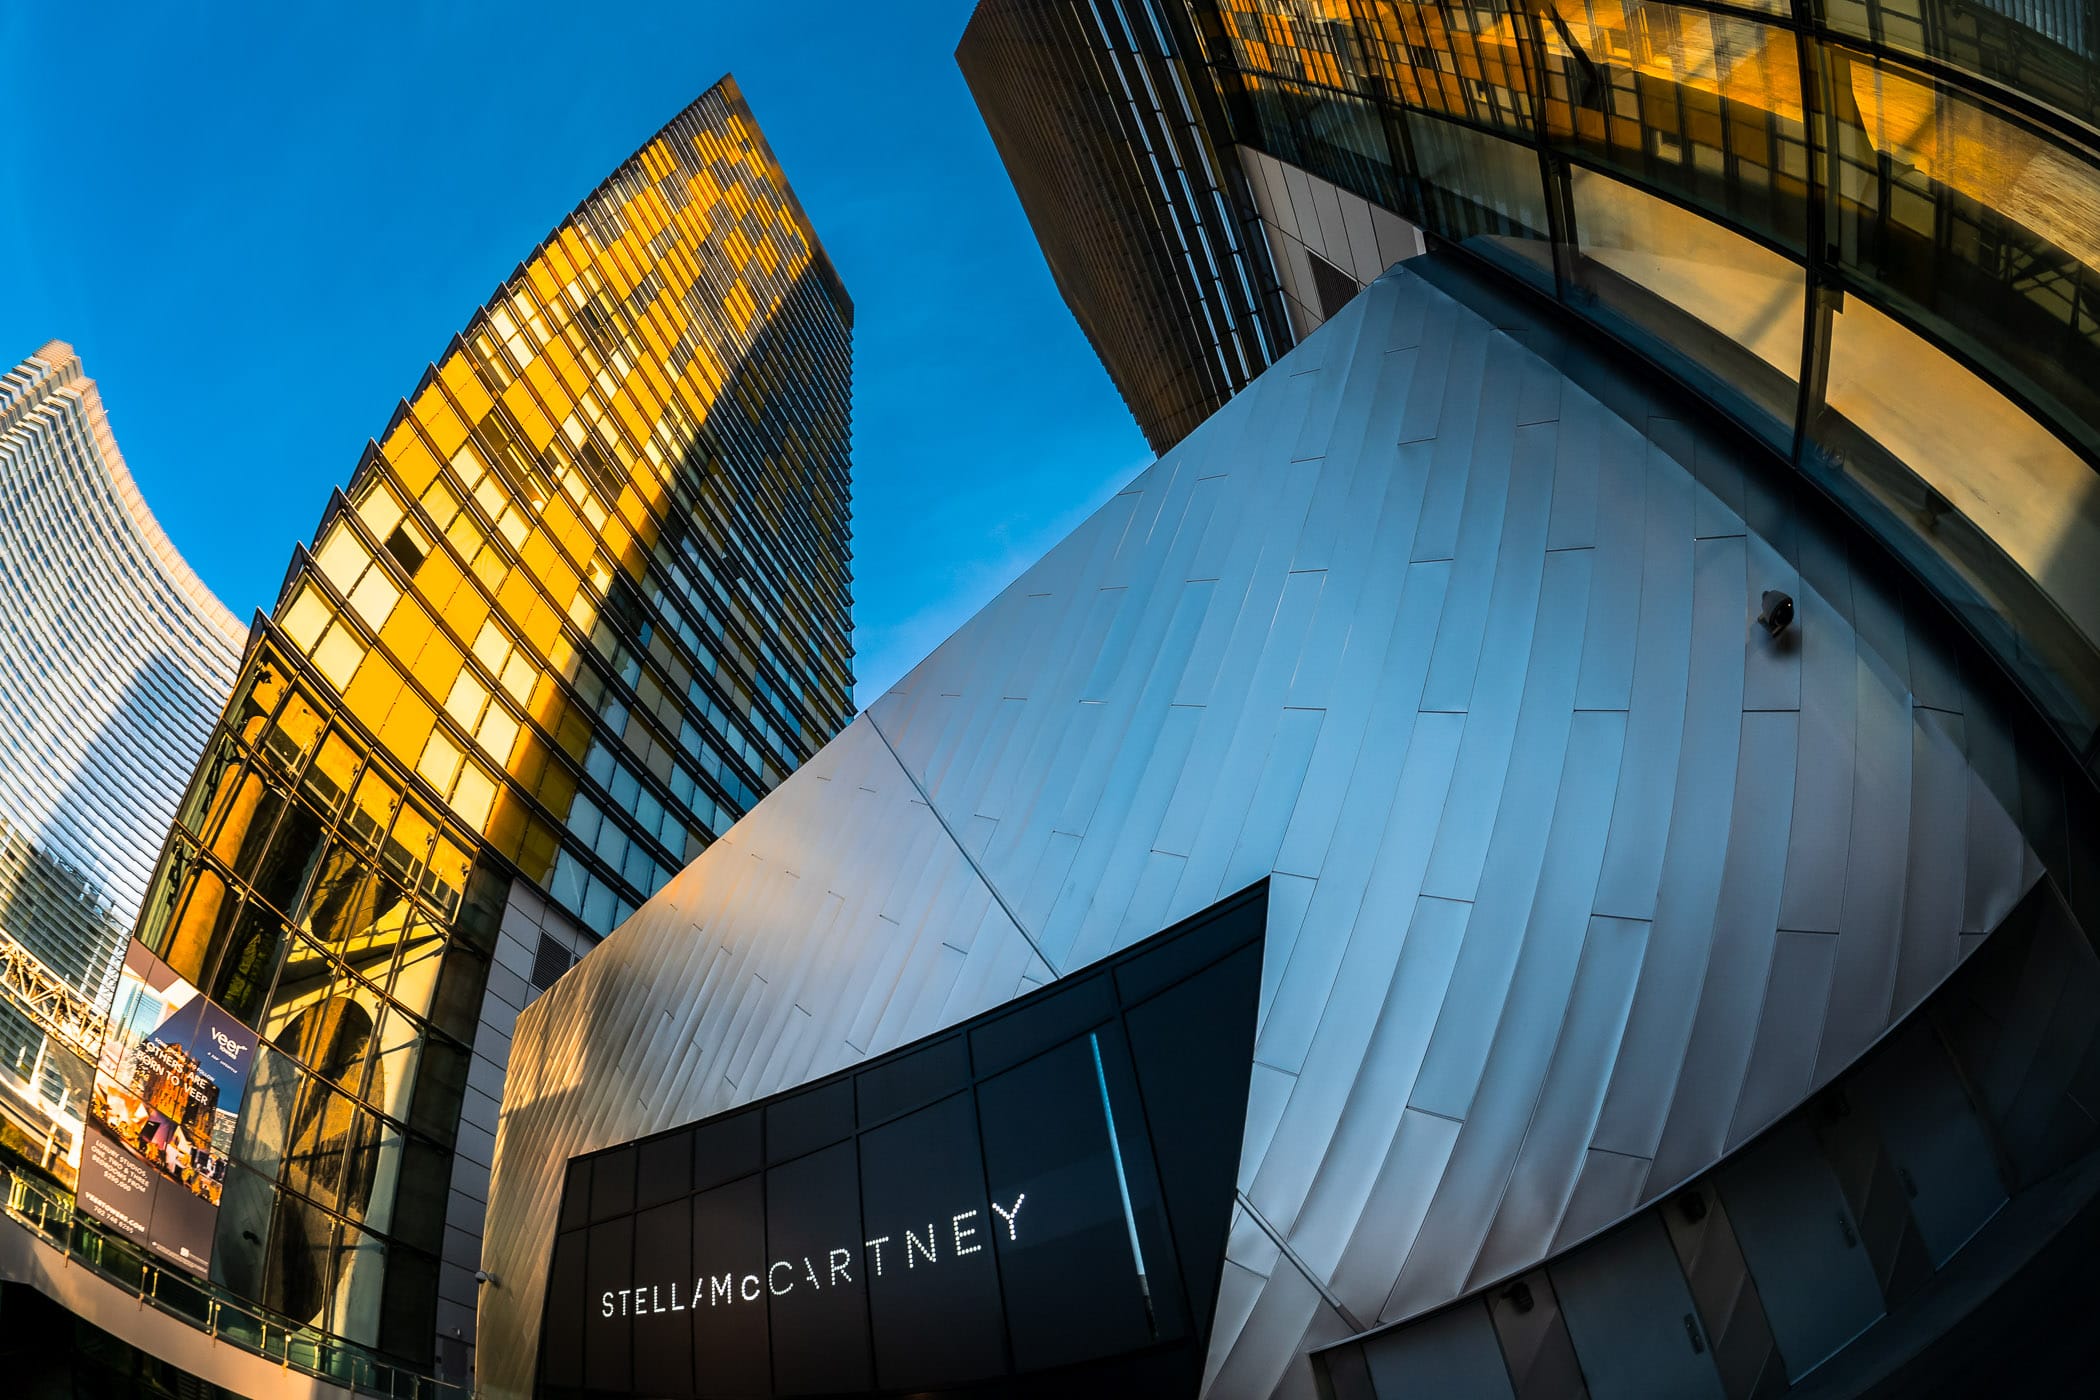 The Stella McCartney boutique at the Crystals in CityCenter Las Vegas is dwarfed by the adjacent Veer Towers.